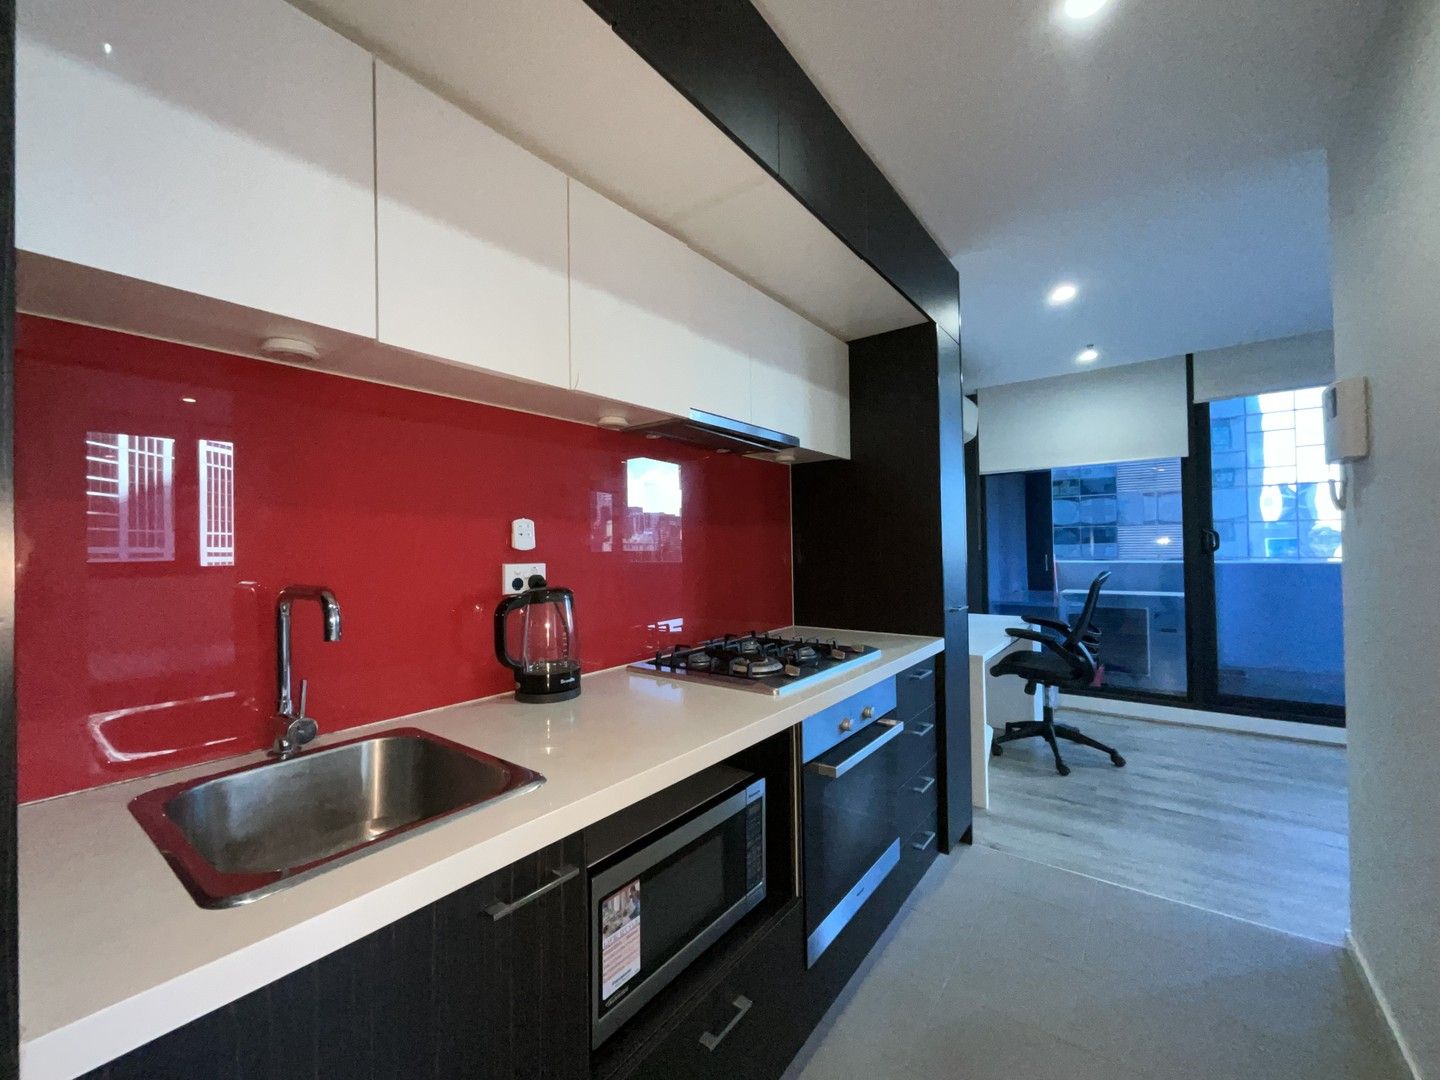 2 bedrooms Apartment / Unit / Flat in 1007/8 Sutherland Street MELBOURNE VIC, 3000